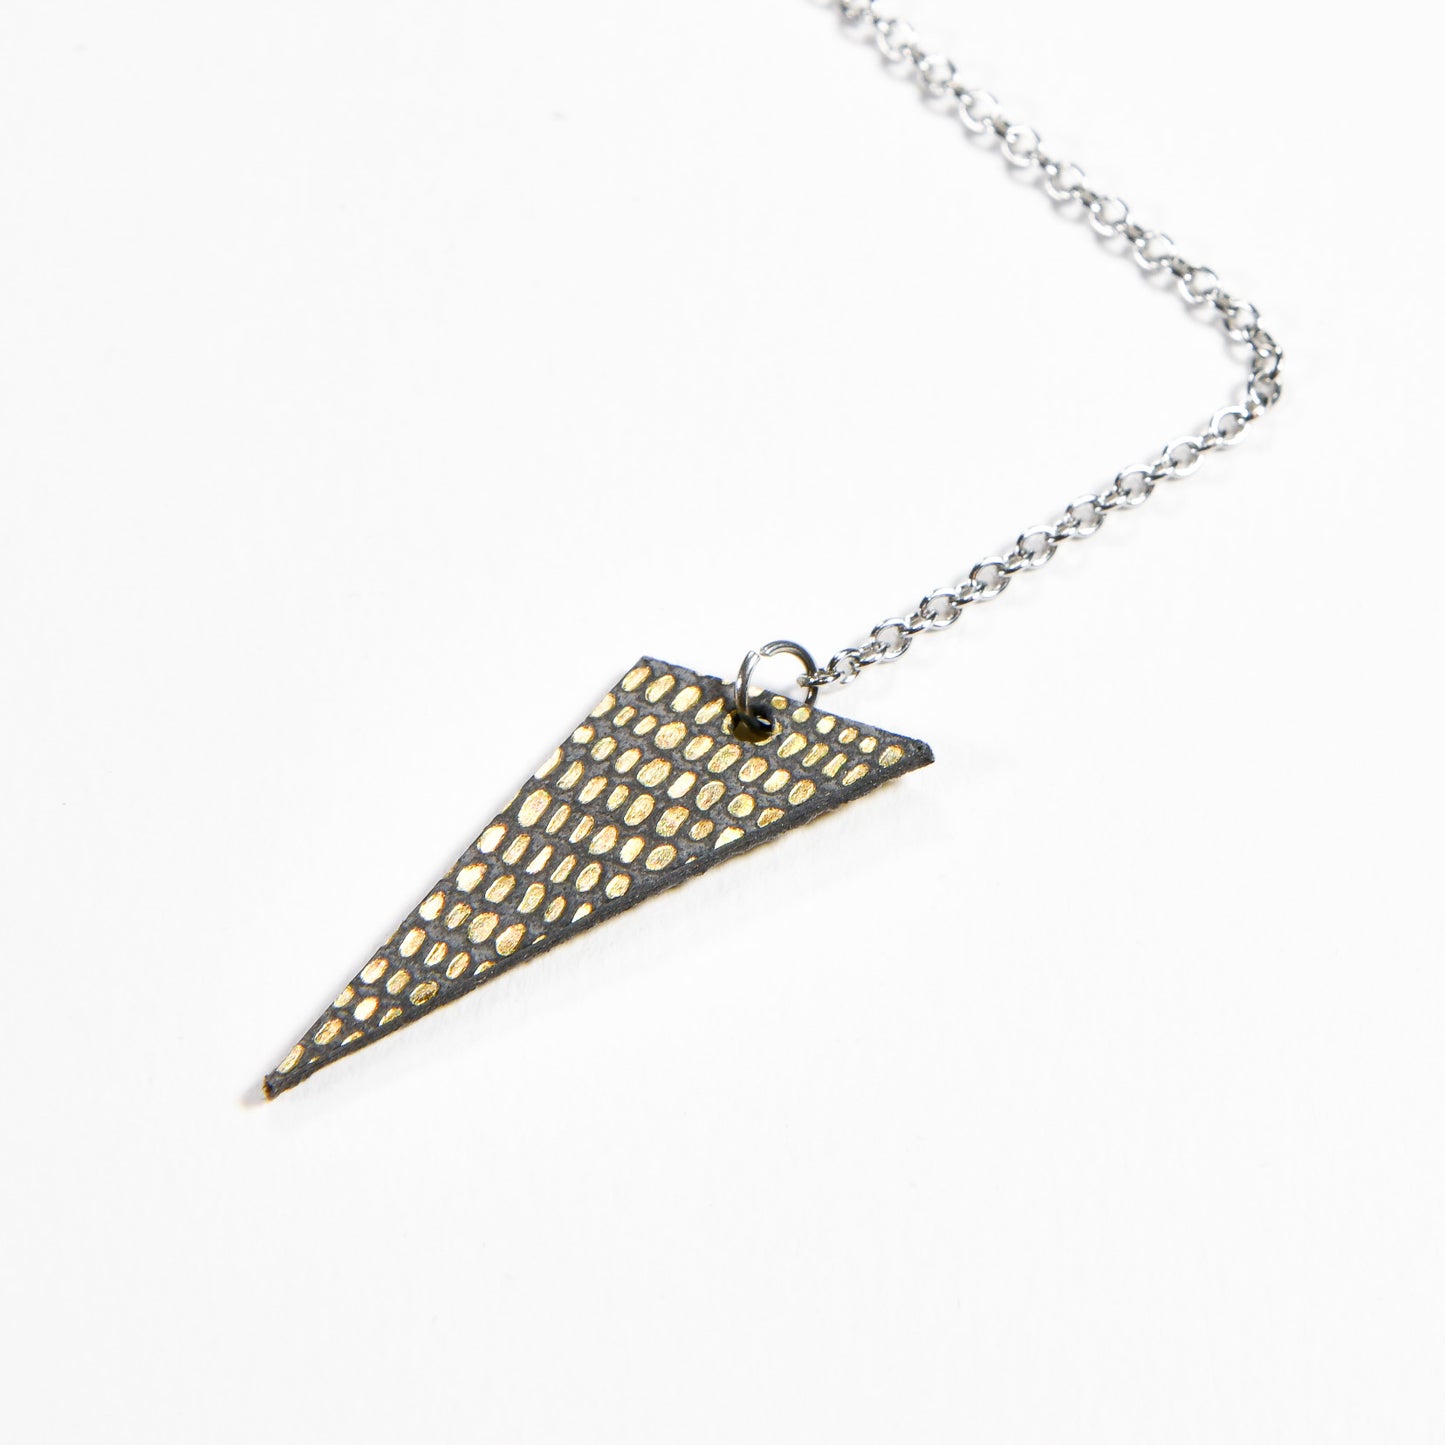 Little black triangle necklace